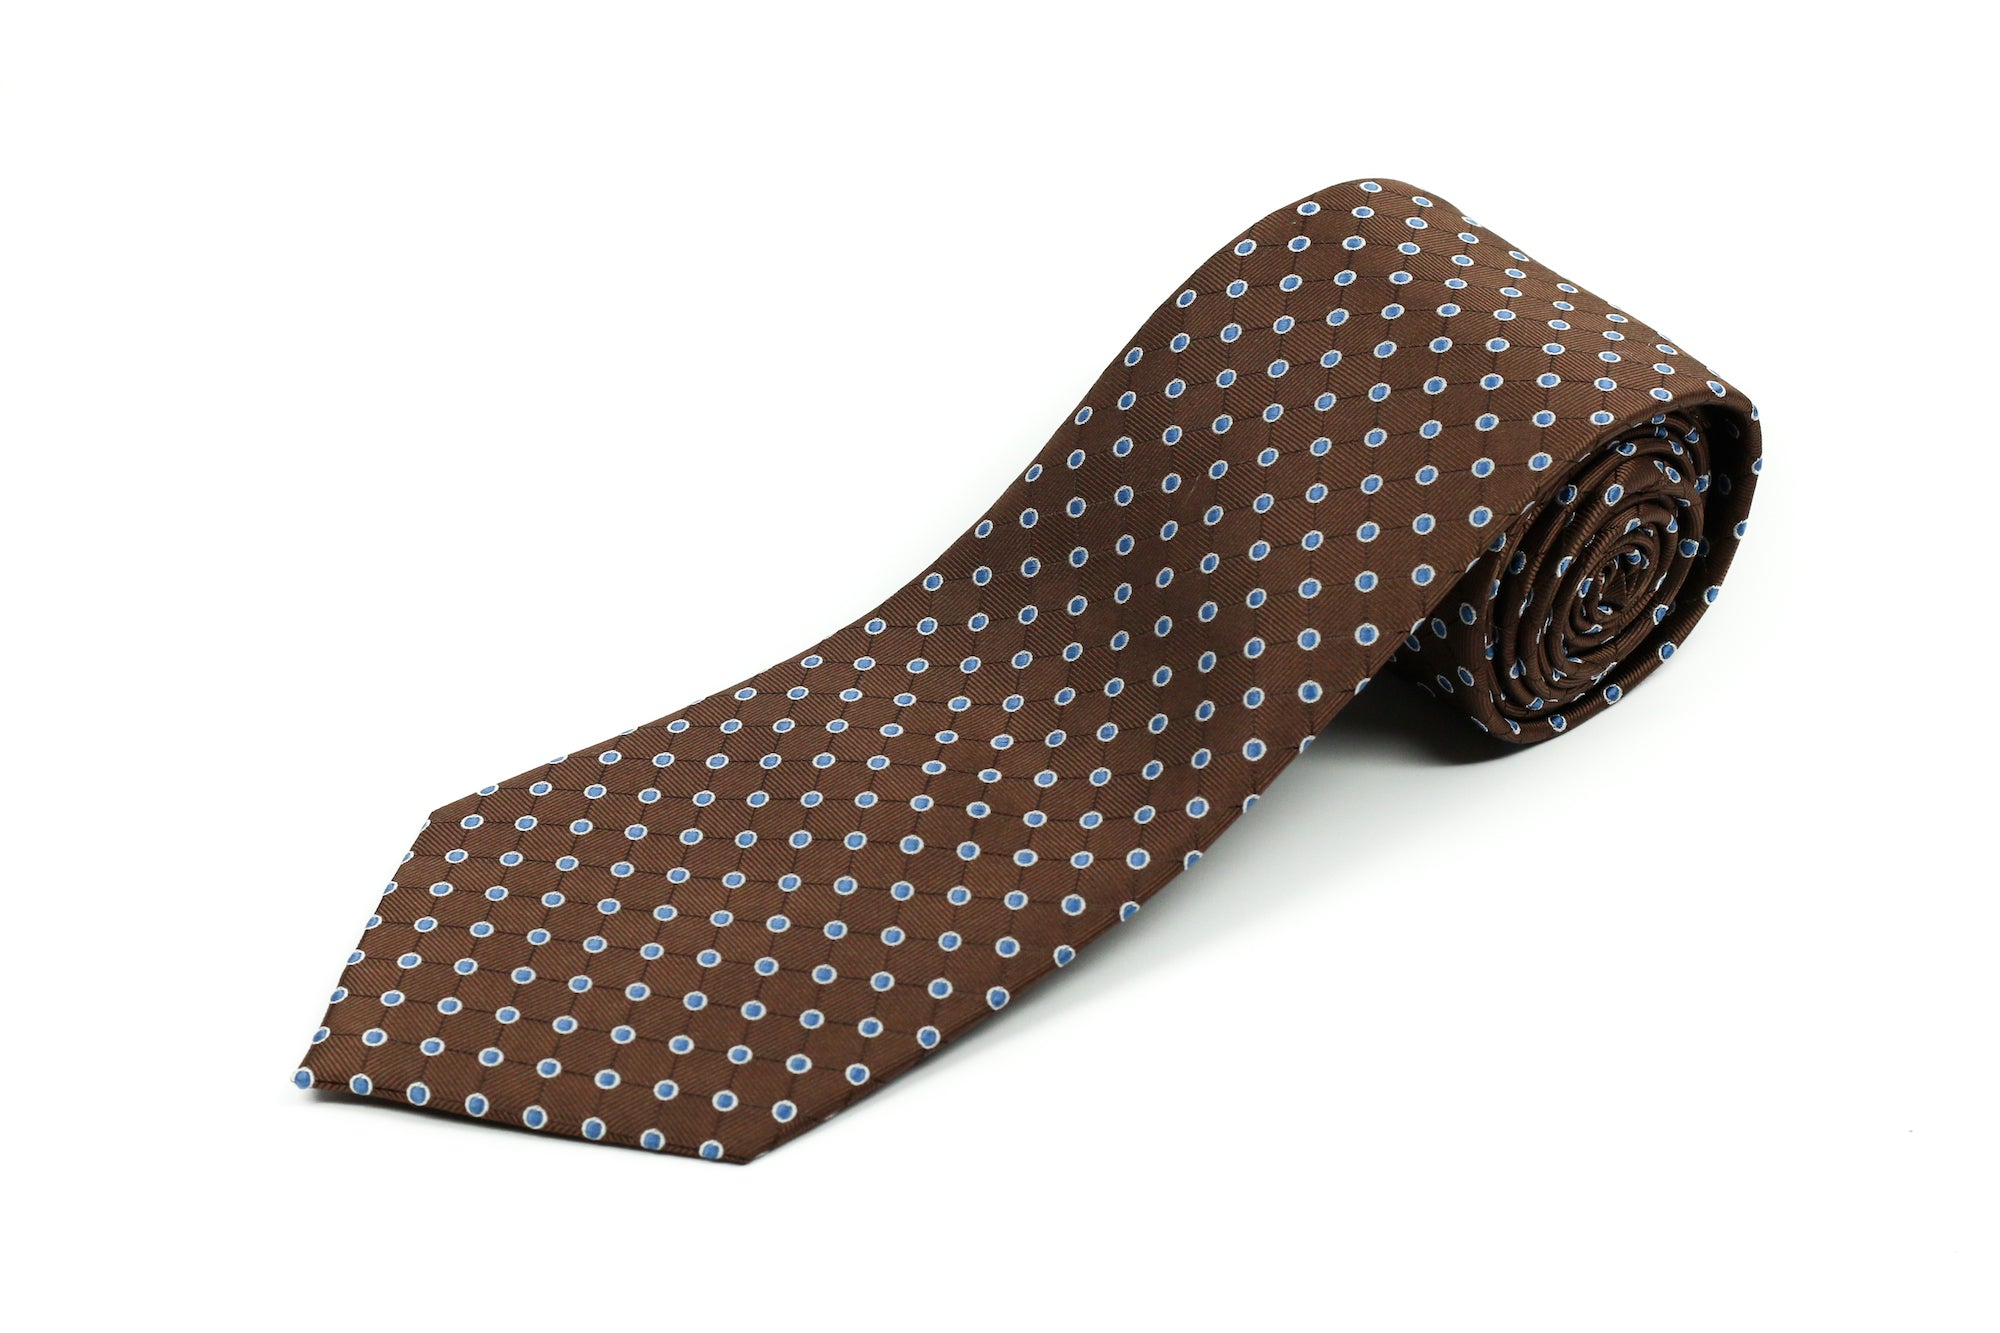 100% Silk XL Polka Dot Tie for Big and Tall Men